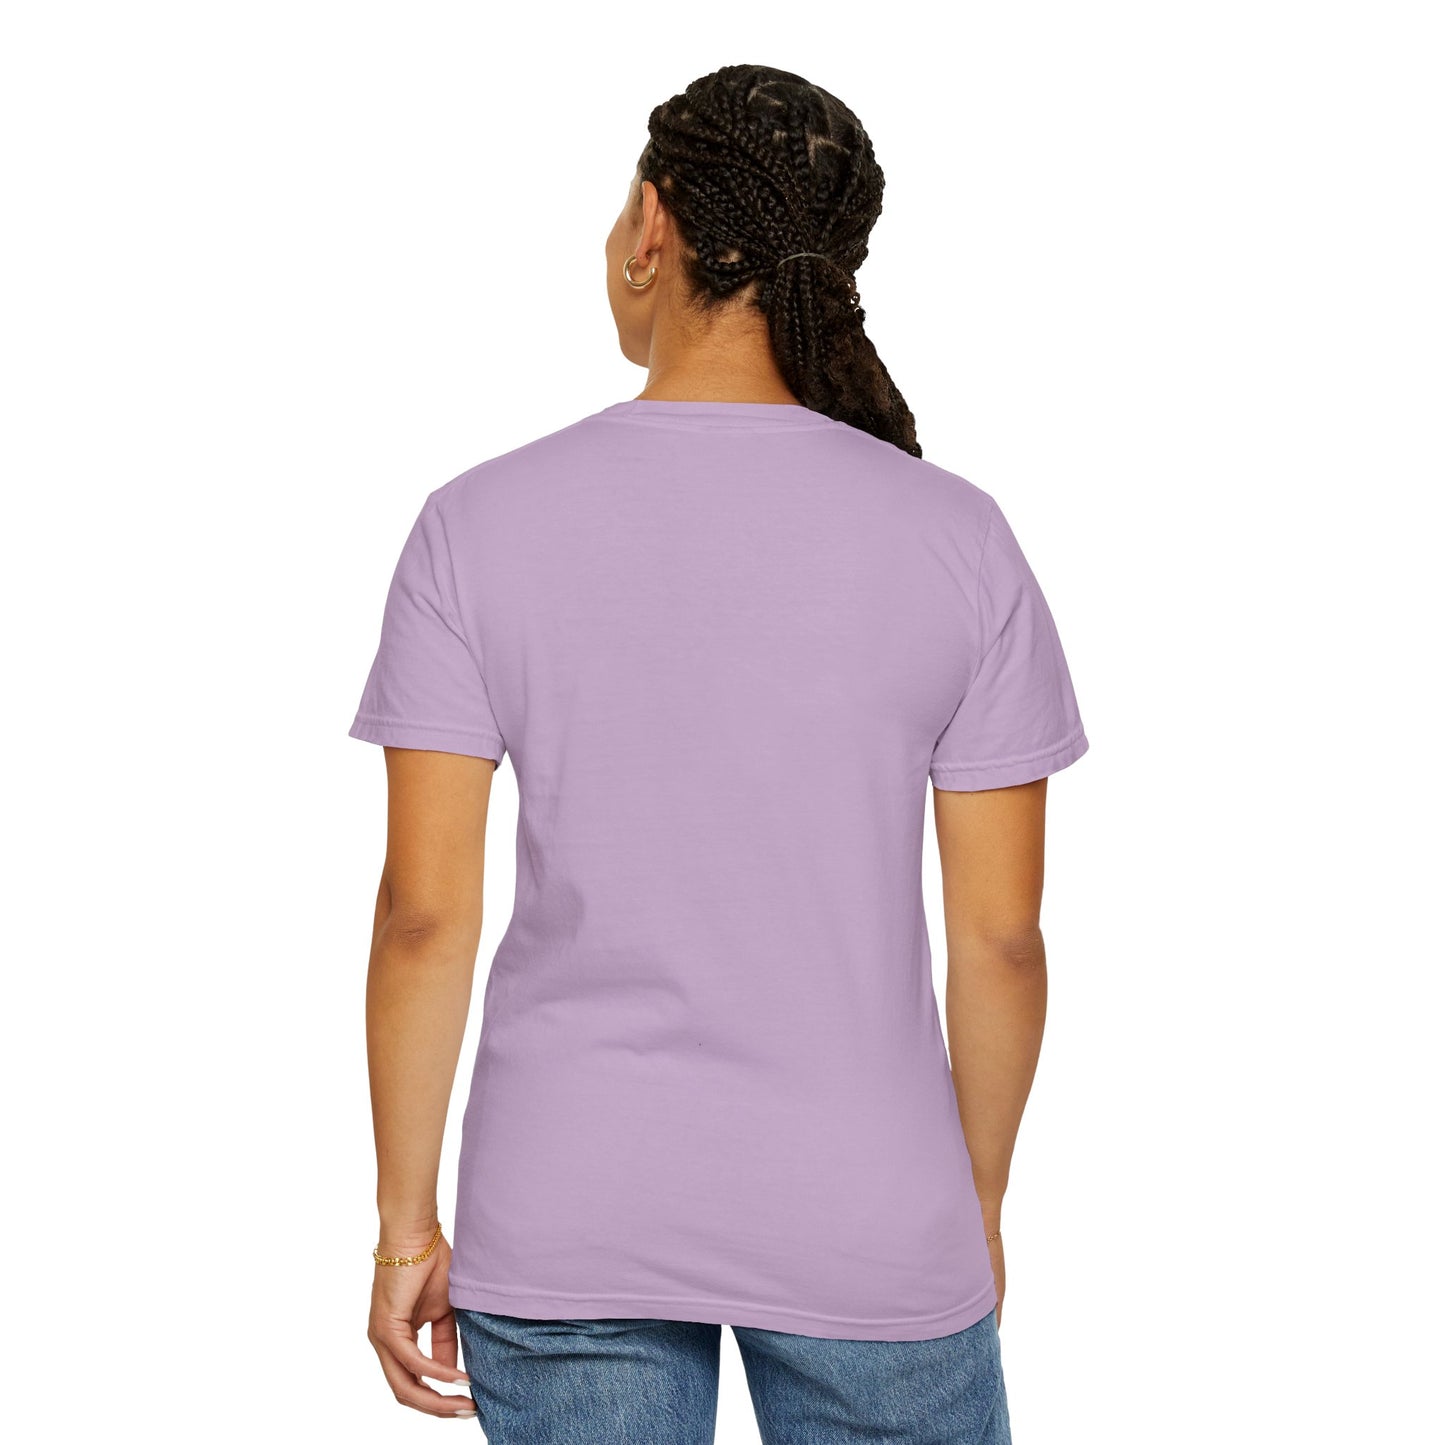 The love between mother and daughter knows no distance - Unisex Garment-Dyed T-shirt